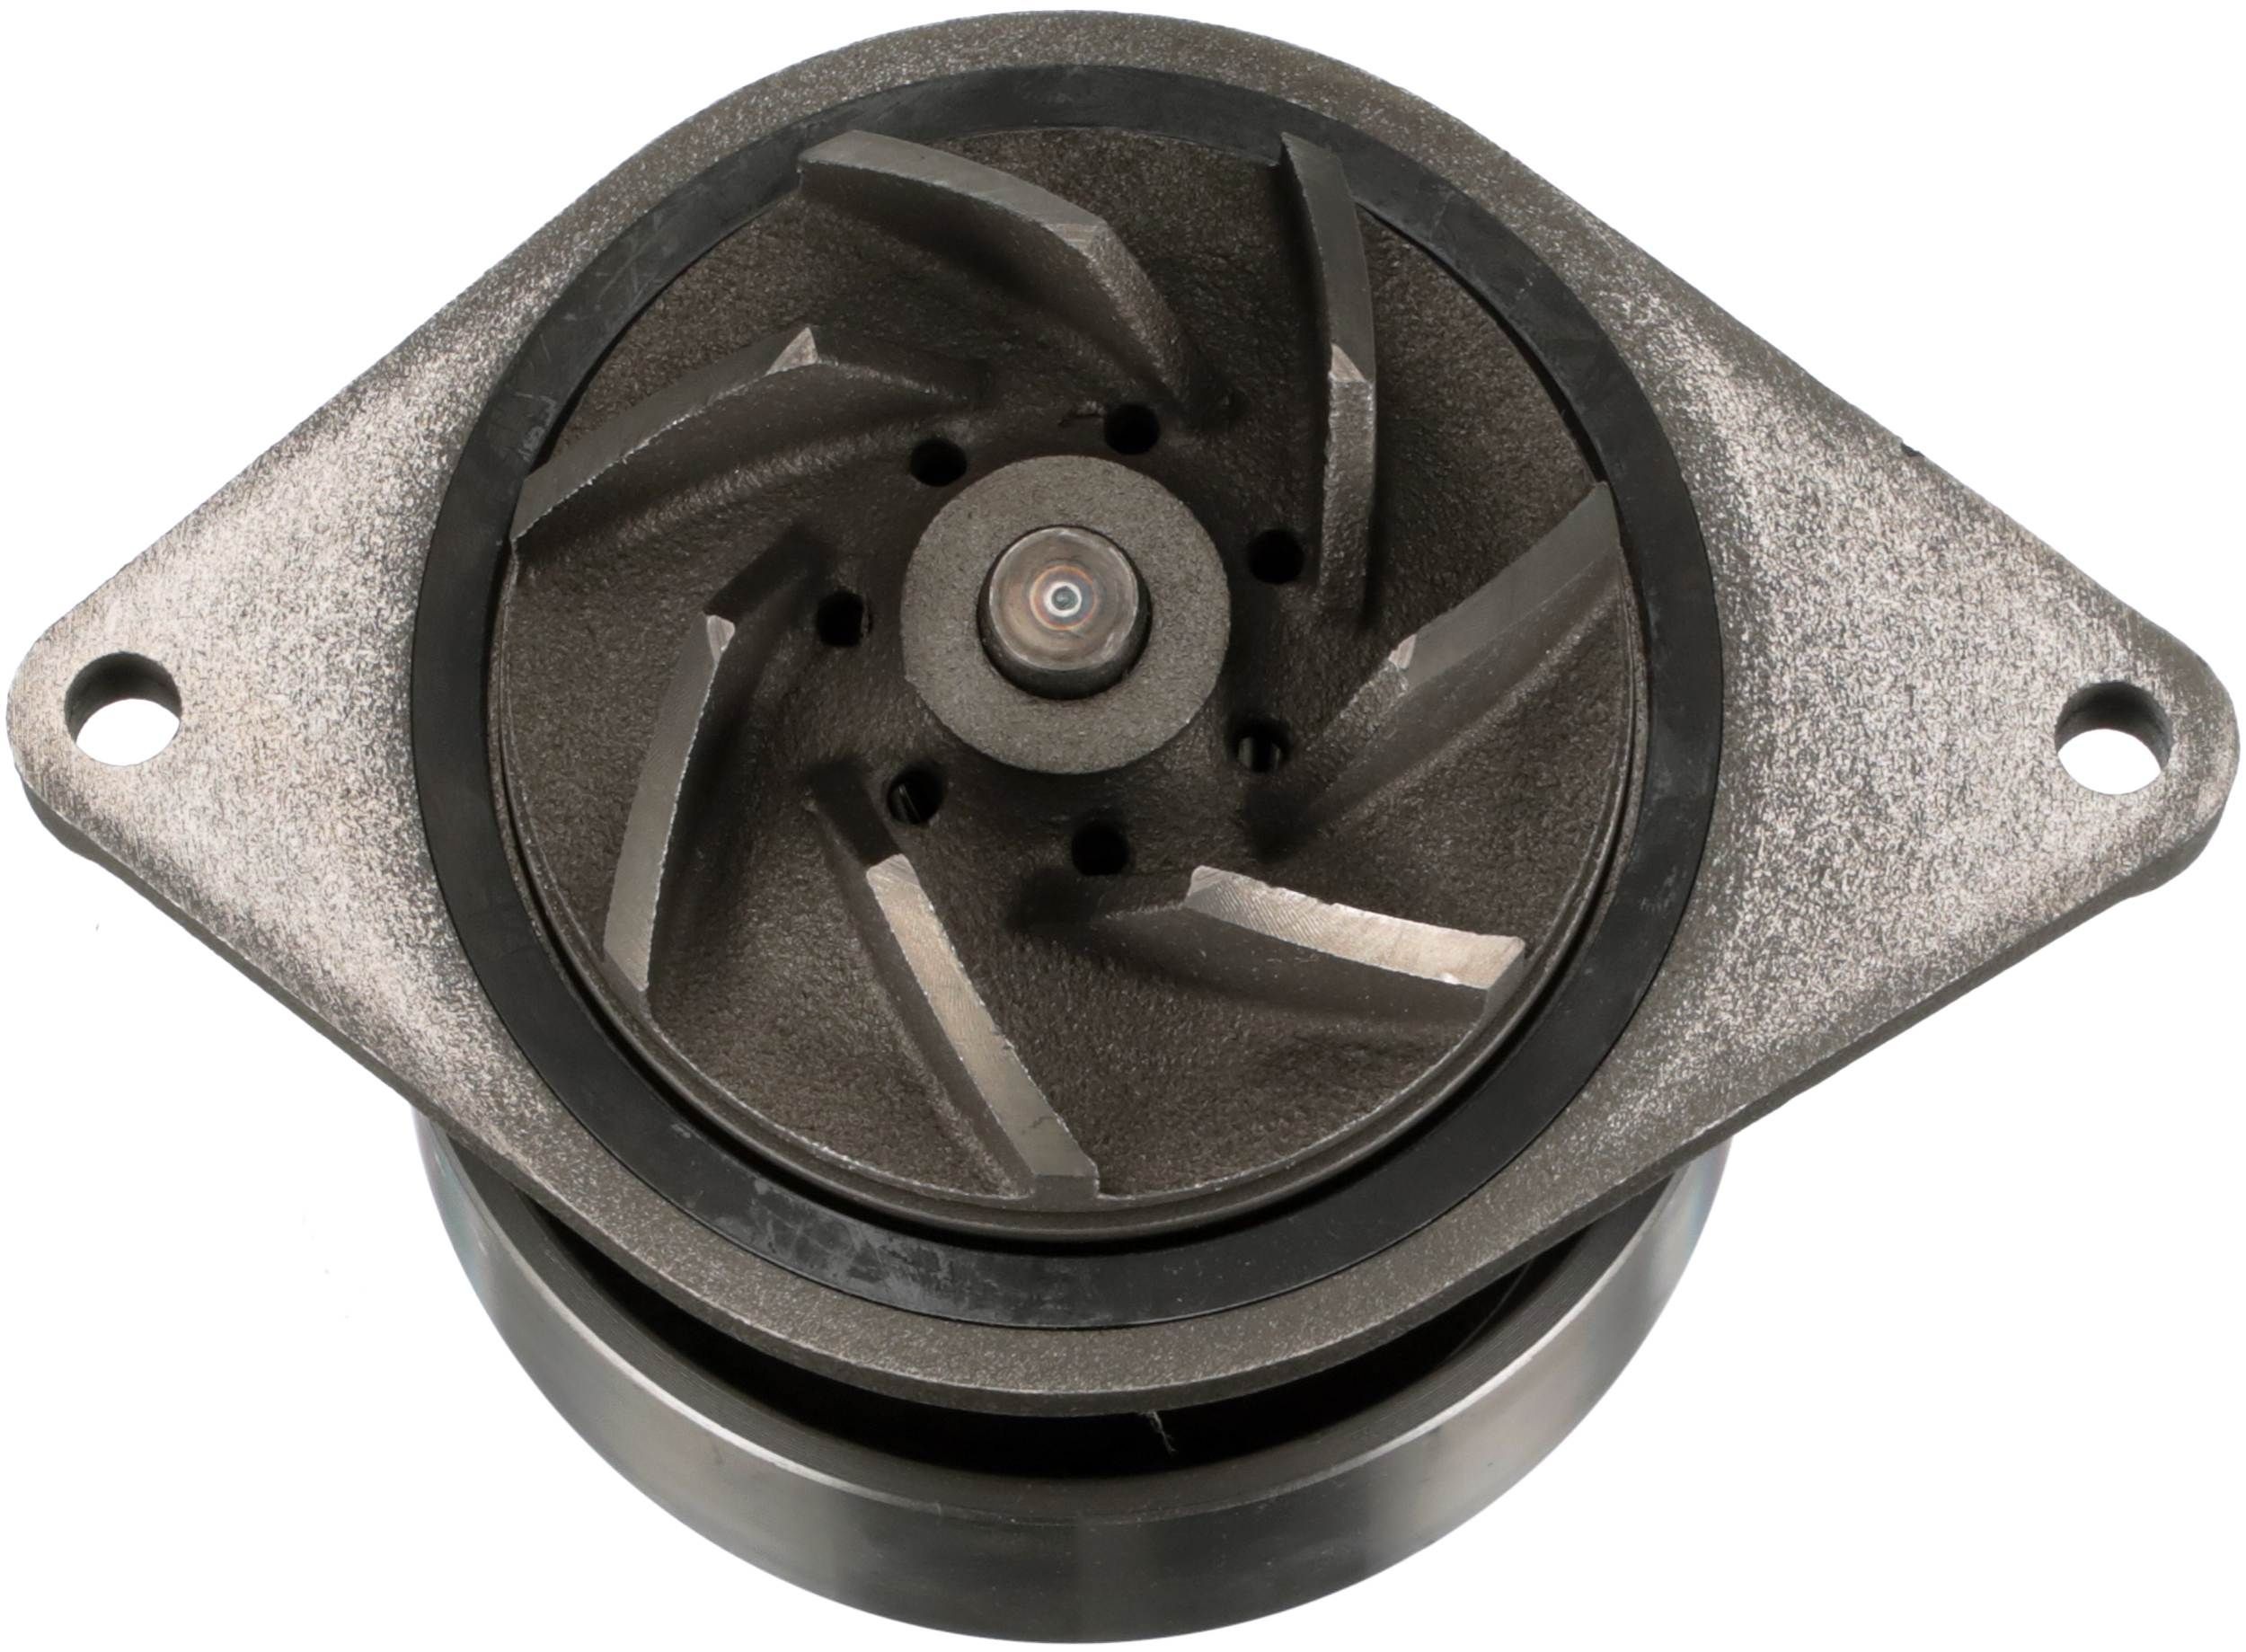 GATES 7702-15059 Water pump Metal, with belt pulley, for v-ribbed belt pulley, with gaskets/seals